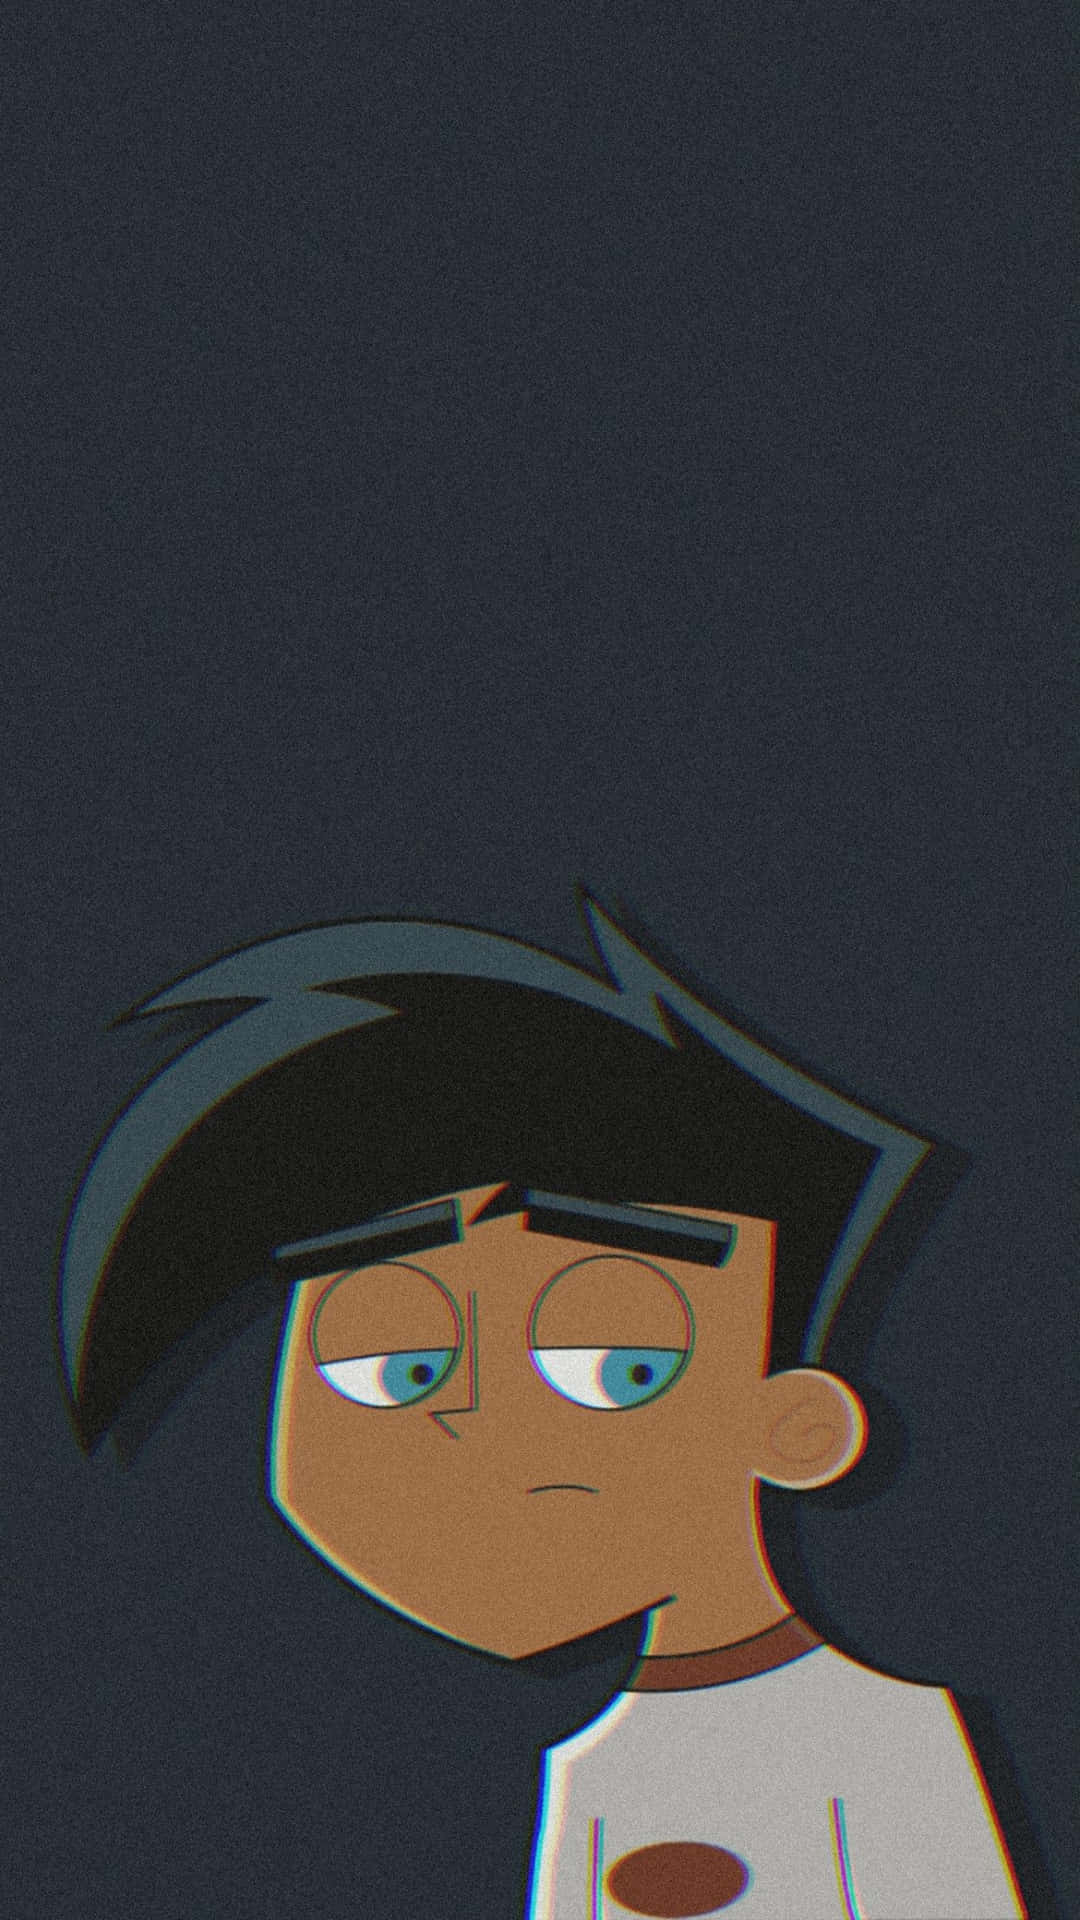 Danny Phantom - Stylish And Ready To Save The Day